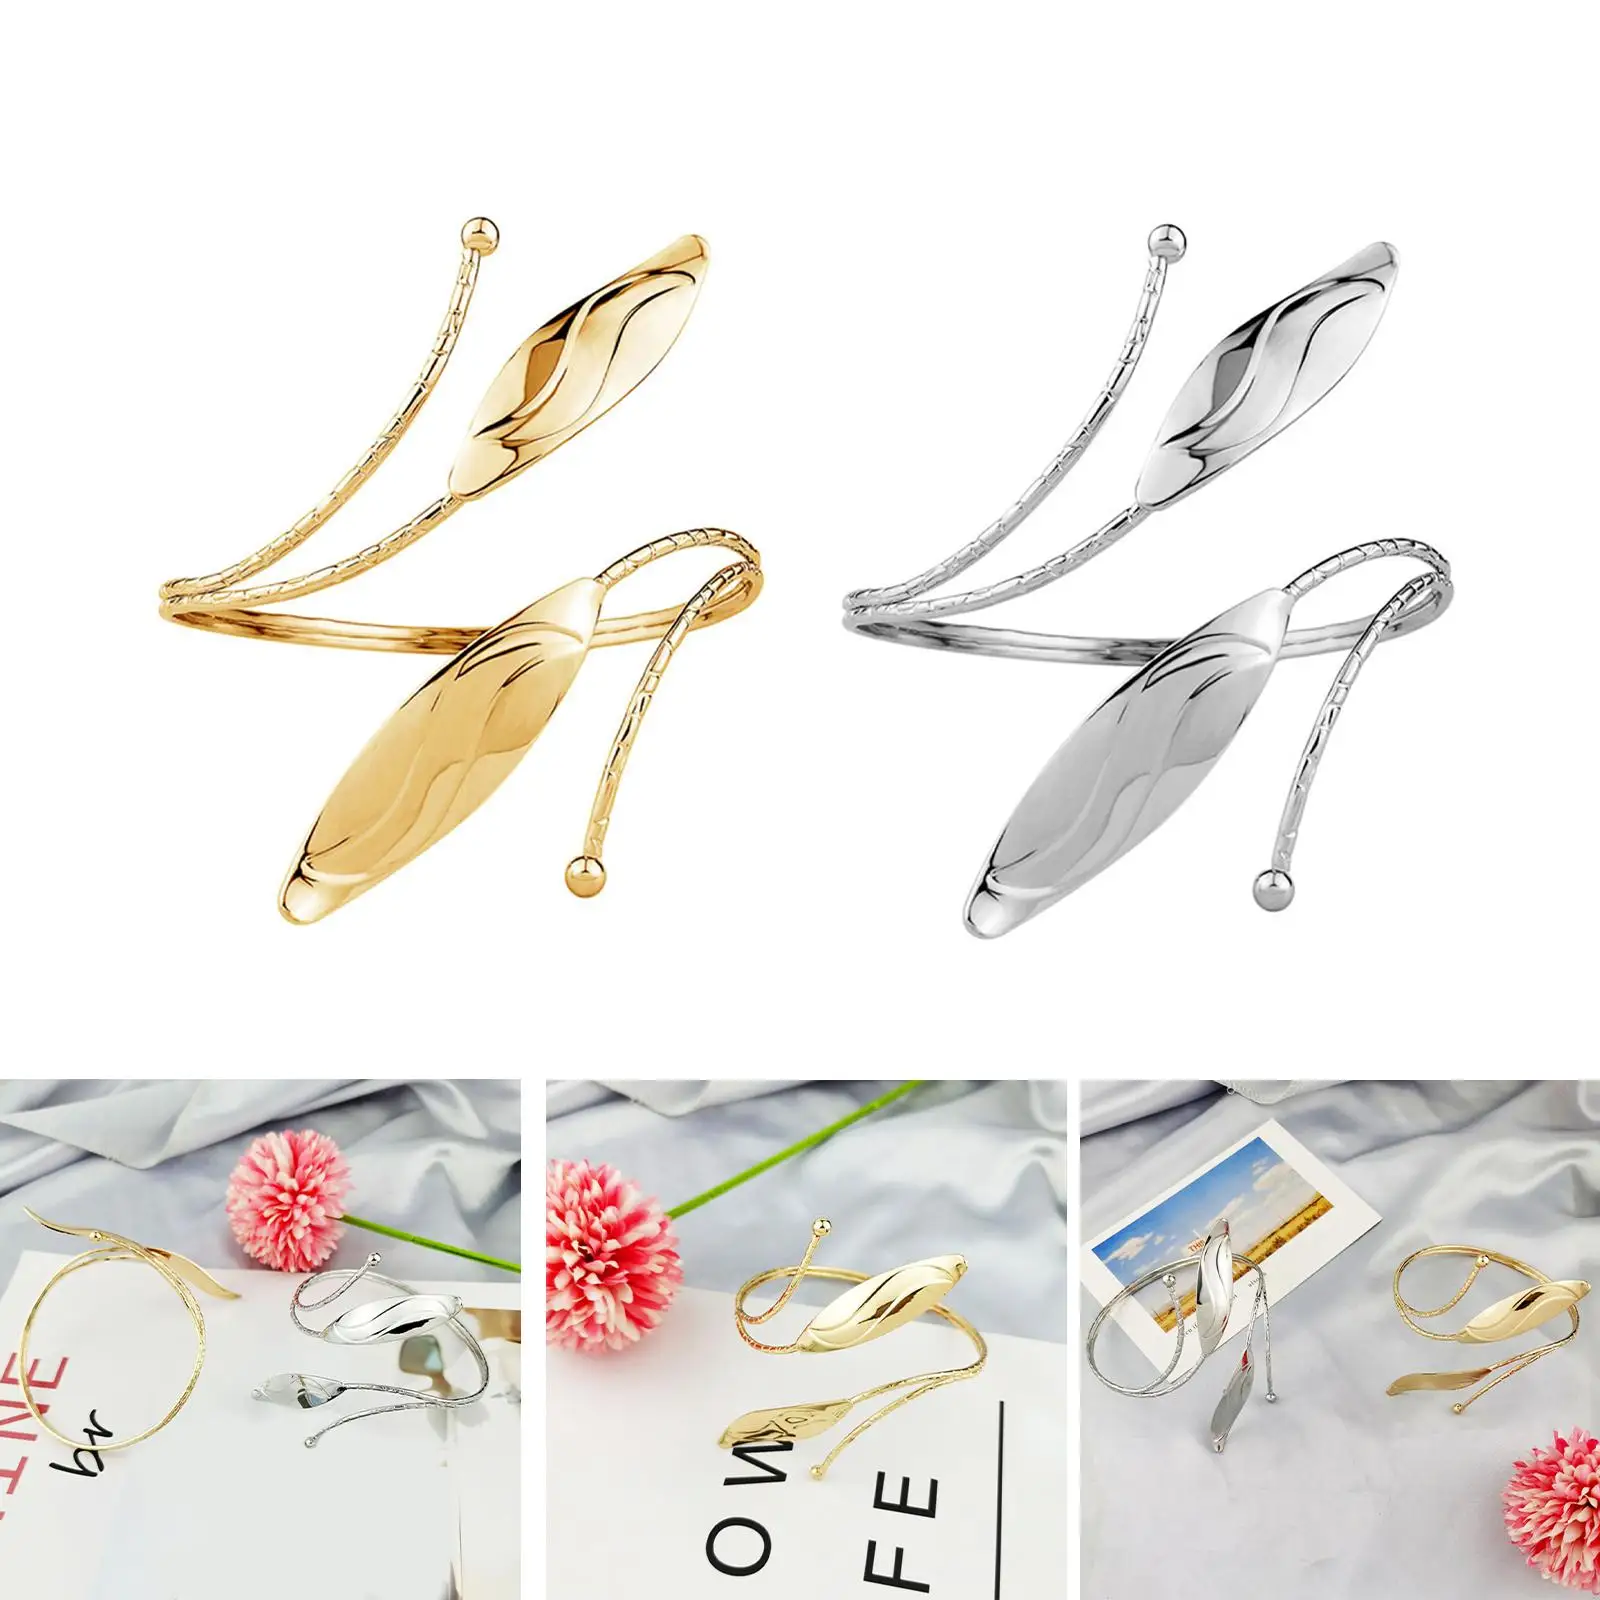 Rm Cuff Upper Rm B Cuff Brcelets for Women  Djustble Open Coil Rmlet Rmb Bngle Brcelet Costume Jewelry